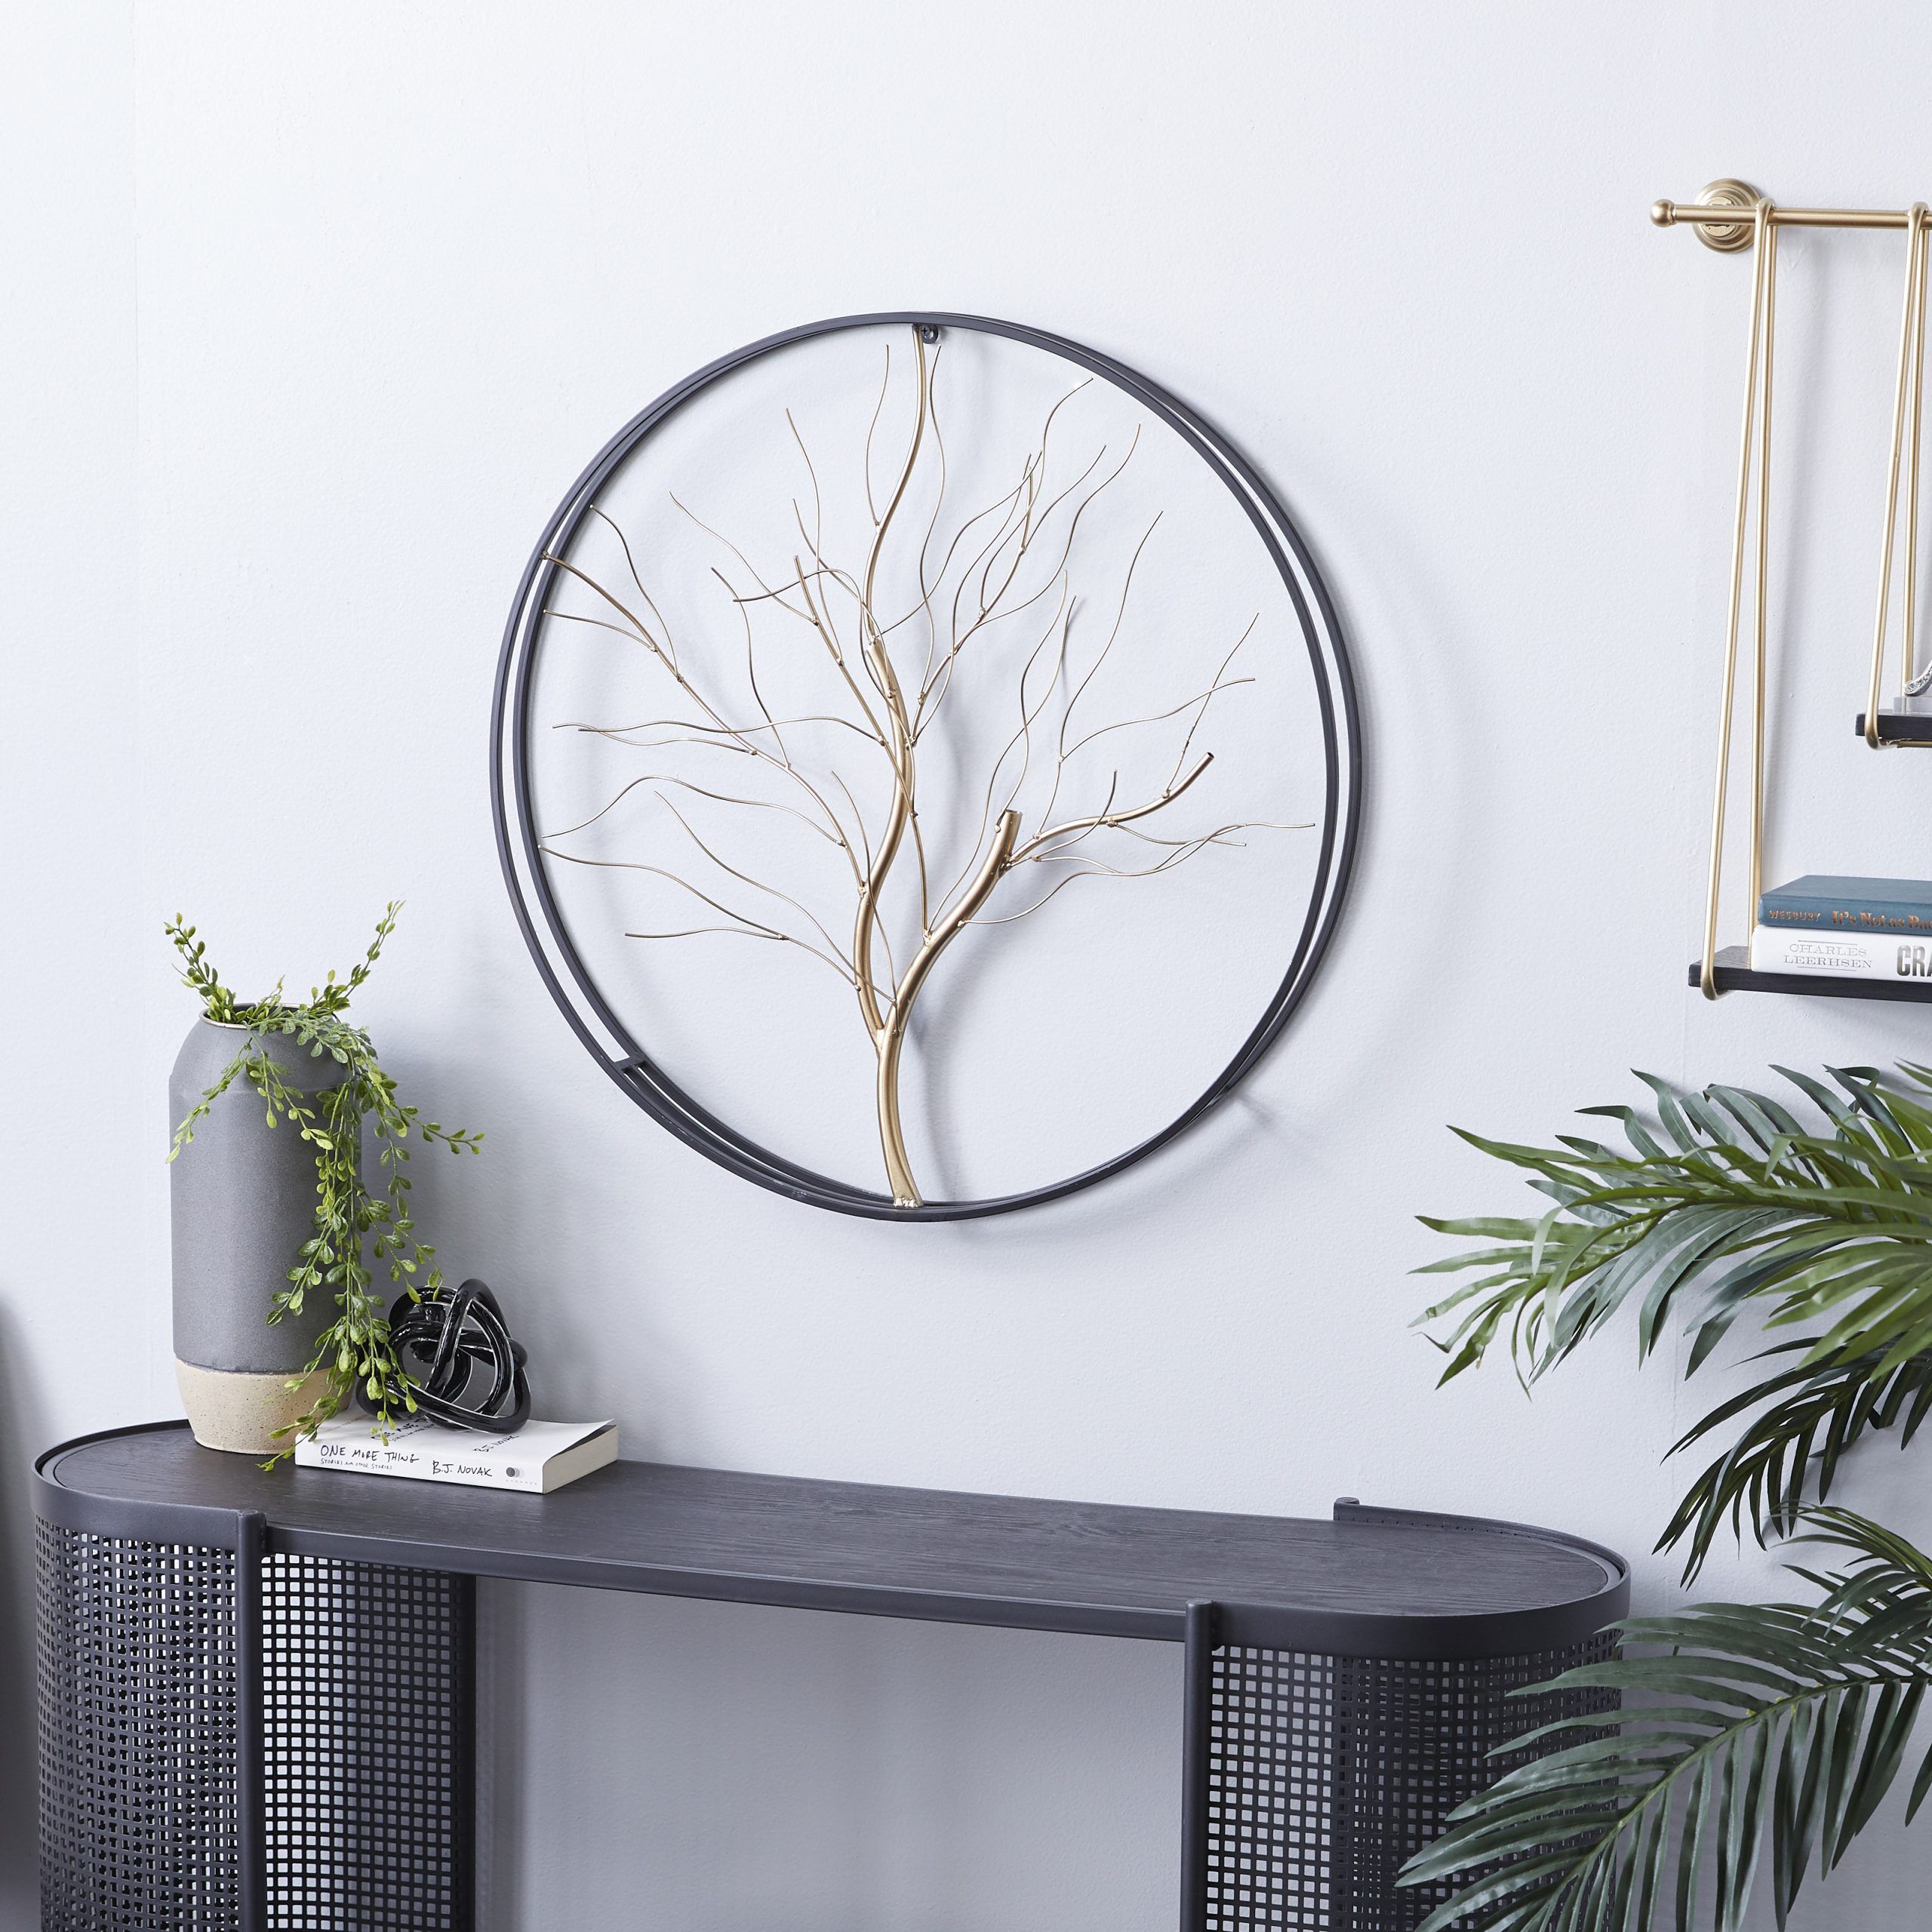 Decmode Large Round Glam Metal Wall Décor W/ Black Metal Frame And Tree Pertaining To Most Current Spiral Circles Metal Wall Art (View 5 of 20)